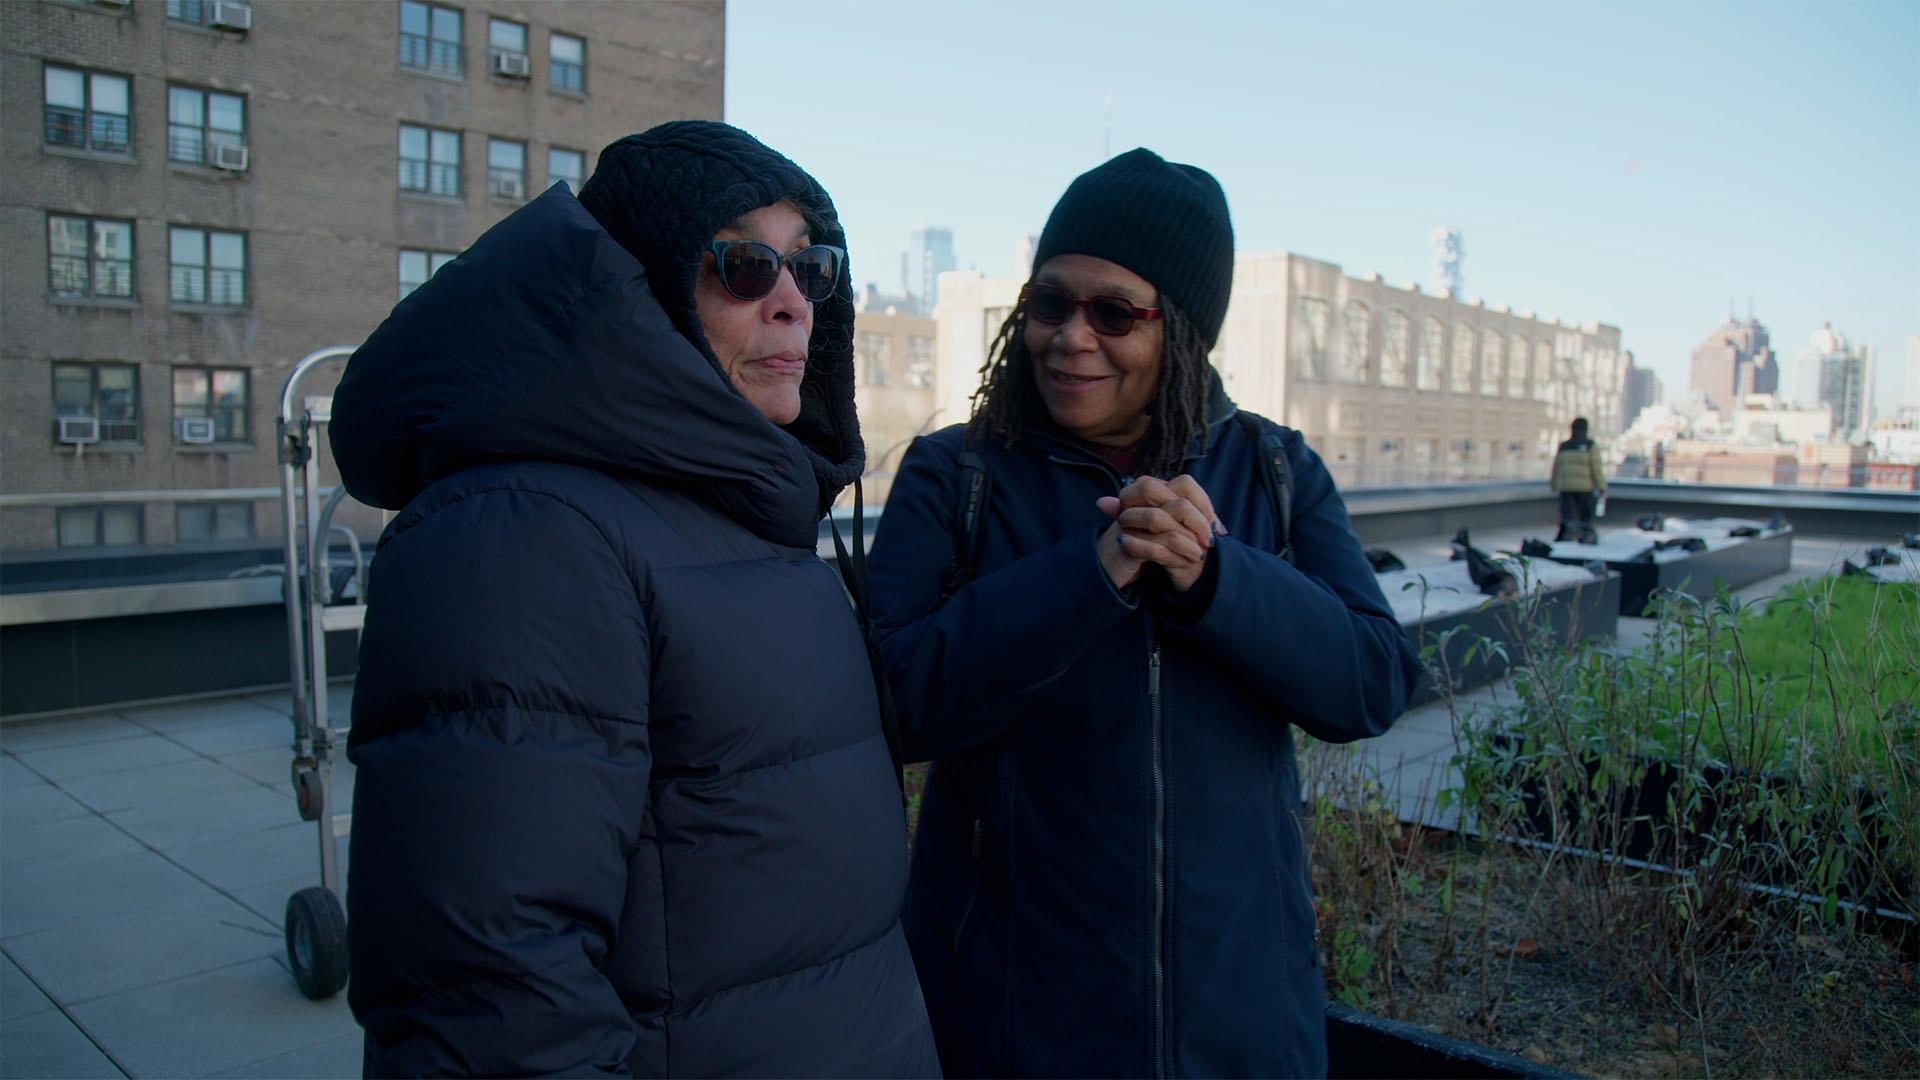 Linda Goode Bryant and Maren Hassinger at Essex Crossing Farm, a rooftop farm in New York City, NY.